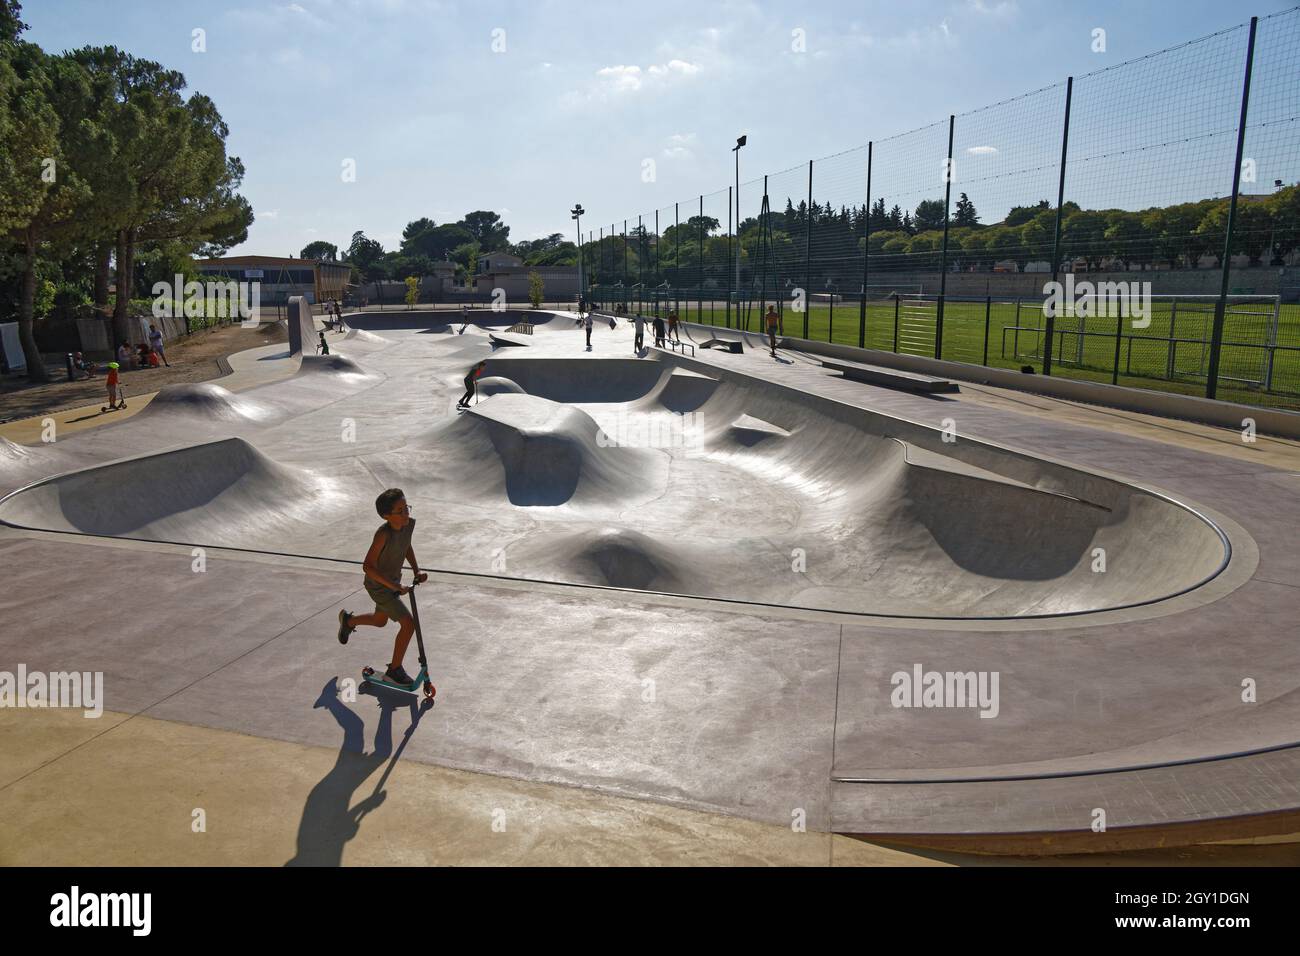 Uzes, France. 17th Jul, 2021. Scooters and skateboards in the Uzes Skatepark. Stock Photo